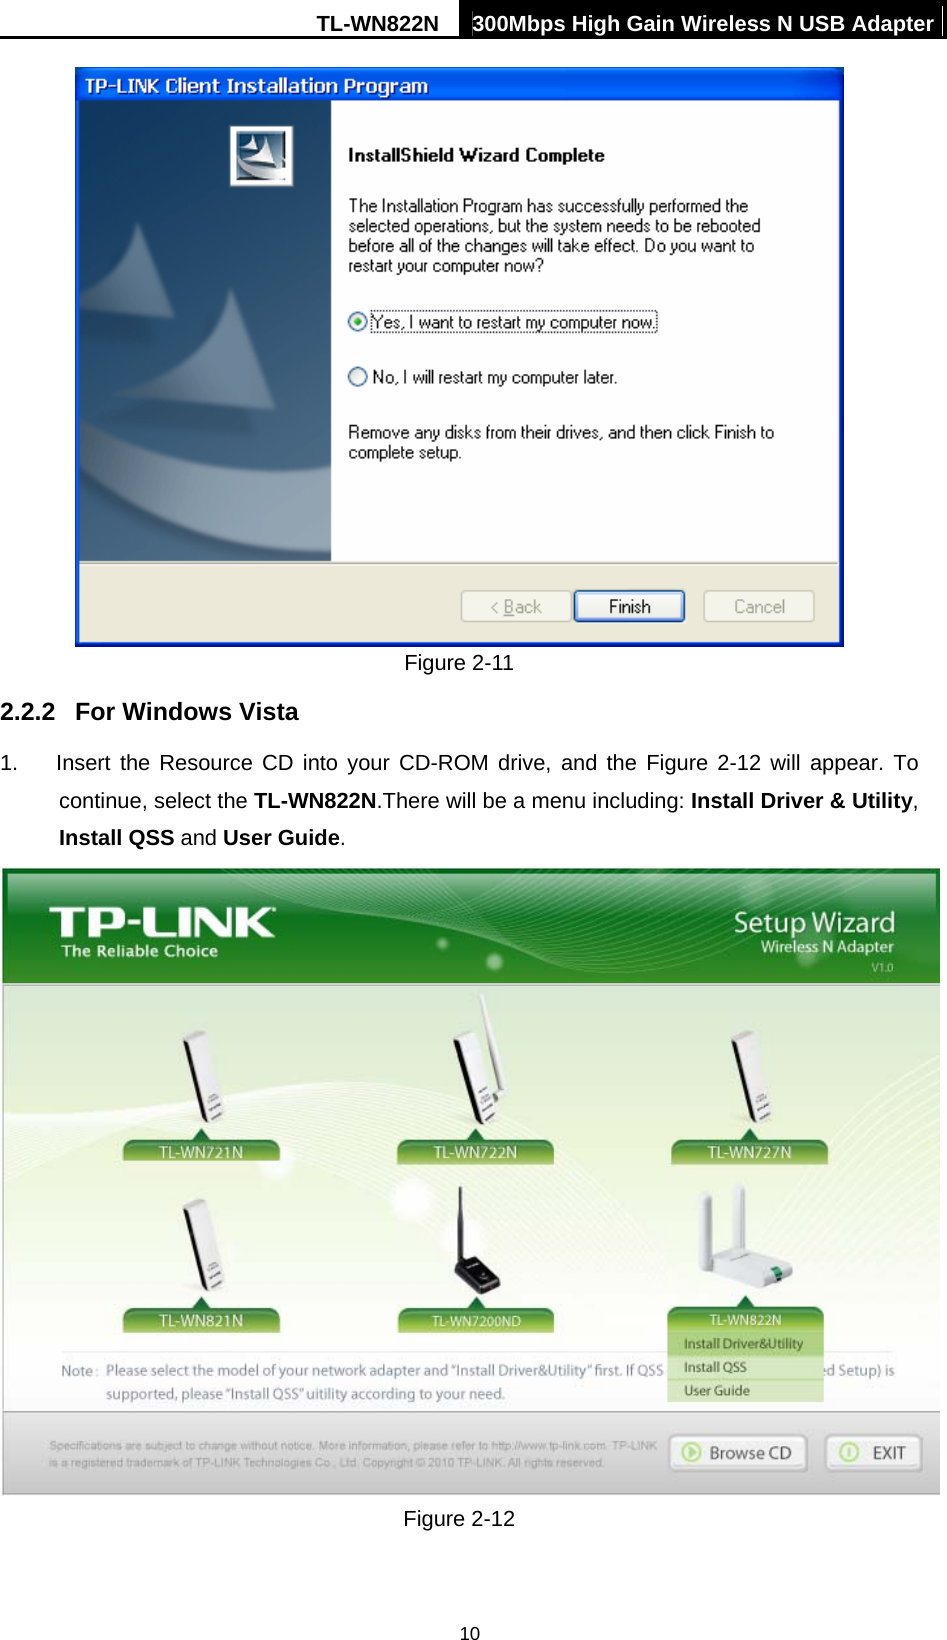 TL-WN822N  300Mbps High Gain Wireless N USB Adapter  10 Figure 2-11 2.2.2  For Windows Vista 1.  Insert the Resource CD into your CD-ROM drive, and the Figure 2-12 will appear. To continue, select the TL-WN822N.There will be a menu including: Install Driver &amp; Utility, Install QSS and User Guide.  Figure 2-12 